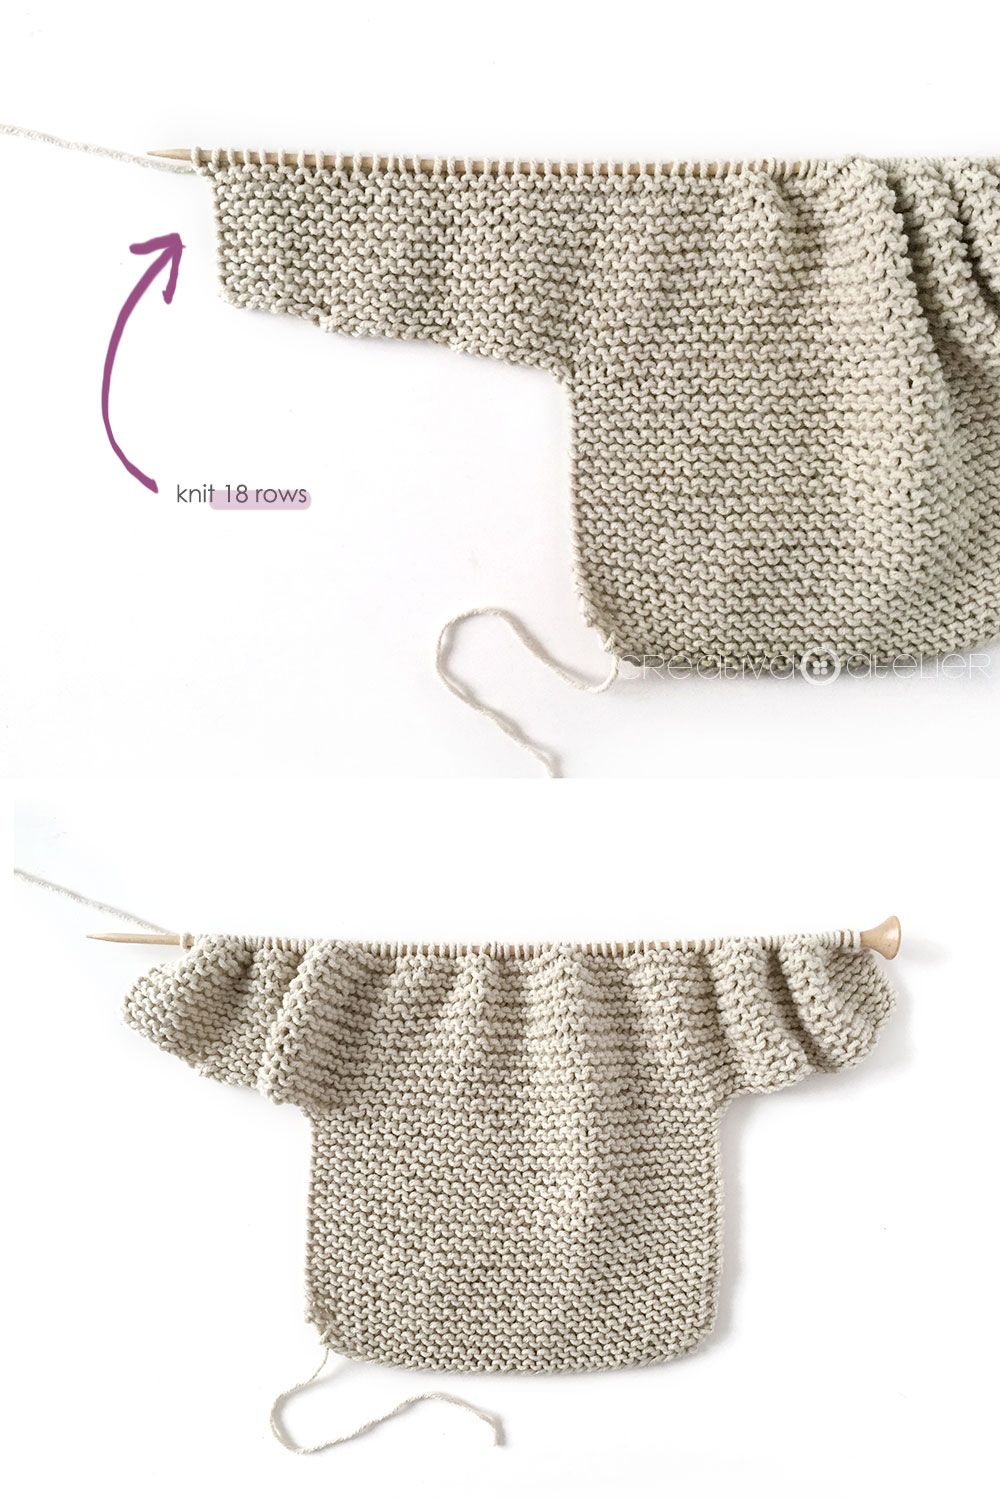 How to make a Knitted Kimono Baby Jacket - Free knitting Pattern & tutorial